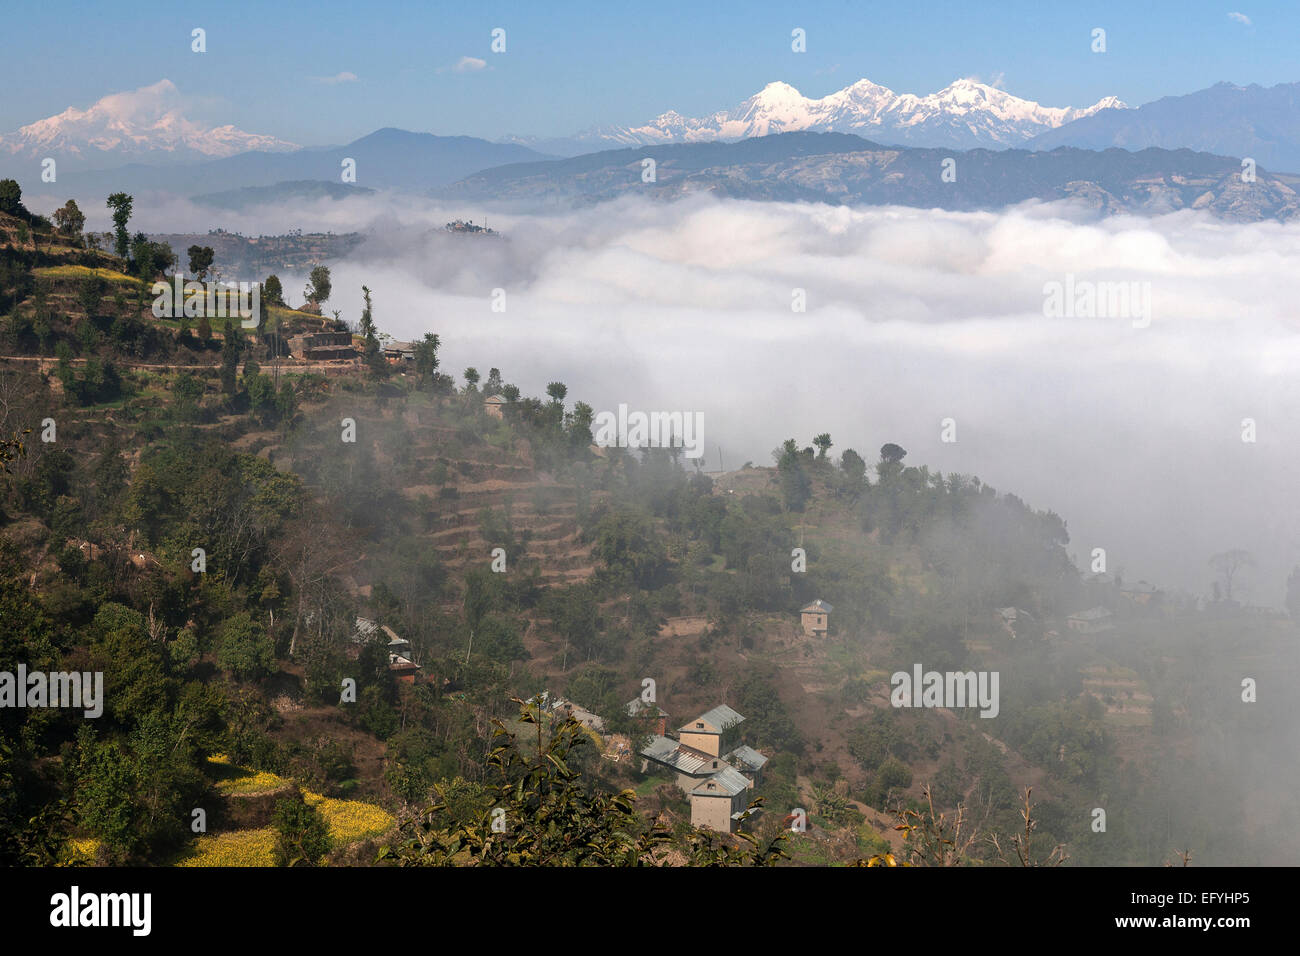 View of the countryside, rural houses, terraced fields and mountains of the Himalayas, fog in the valley, near Dhulikel, Nepal Stock Photo